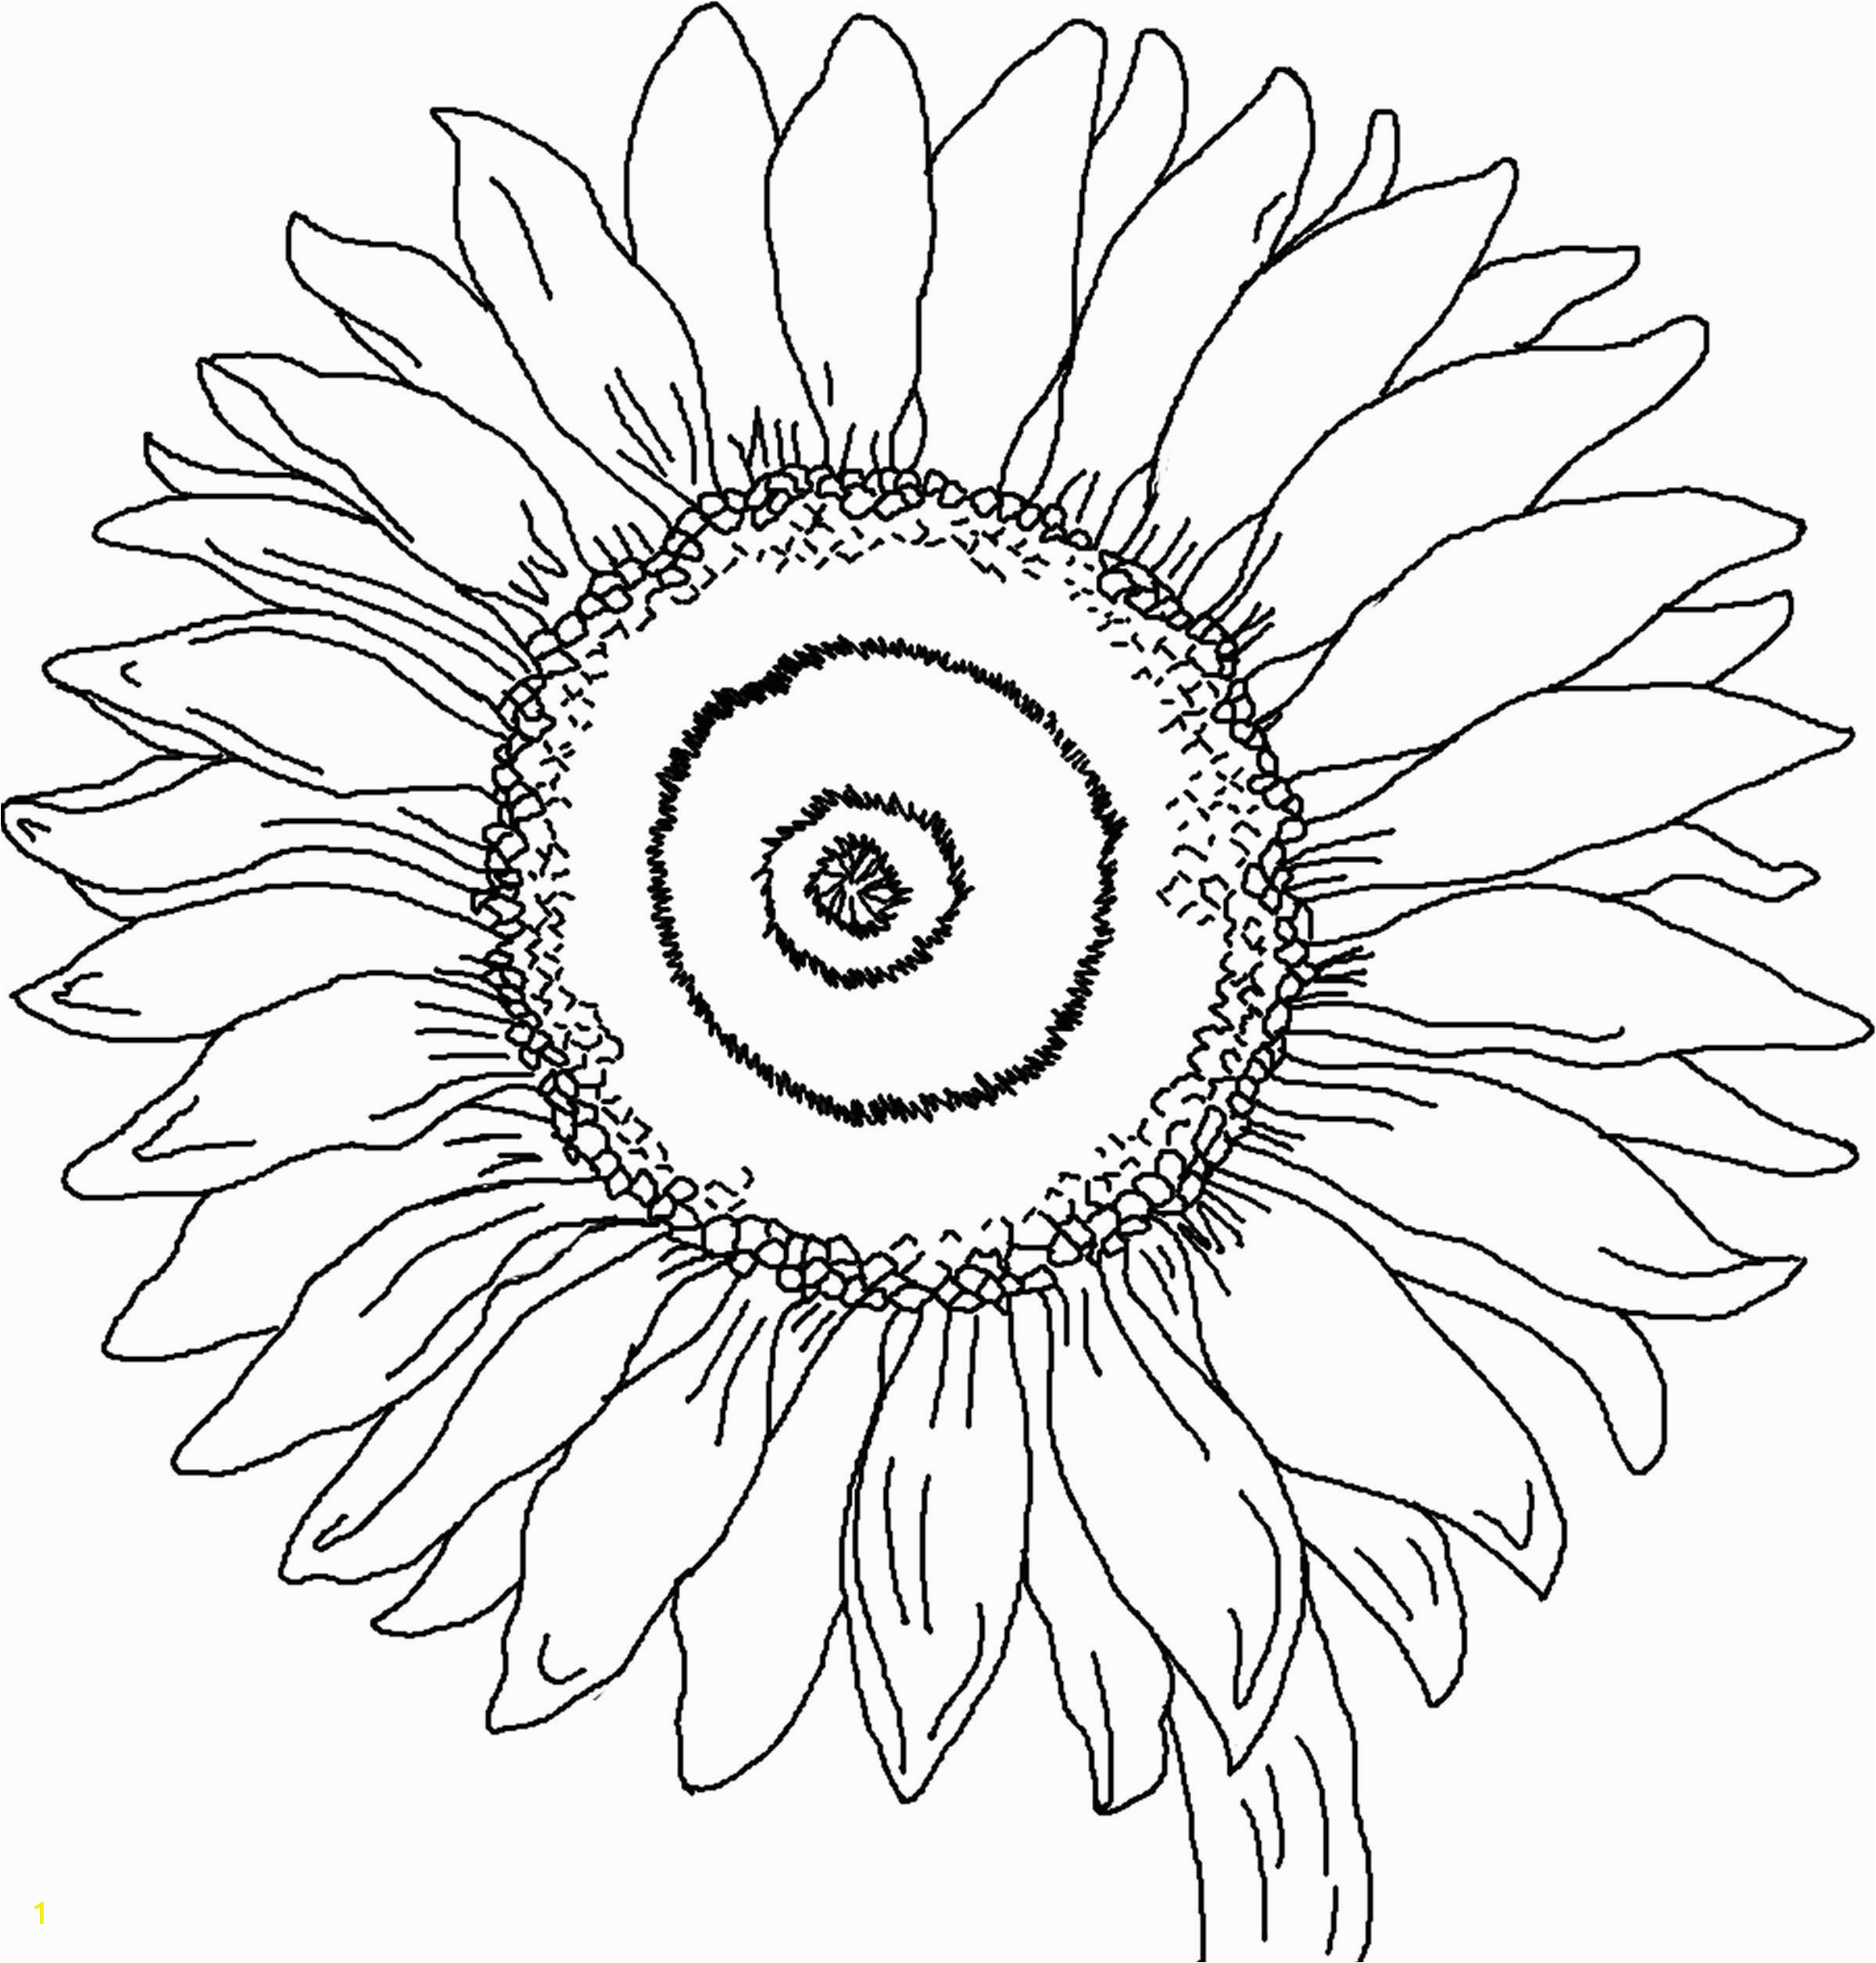 Printable Sunflower Coloring Page Sunflower Coloring Page for Kindergarten